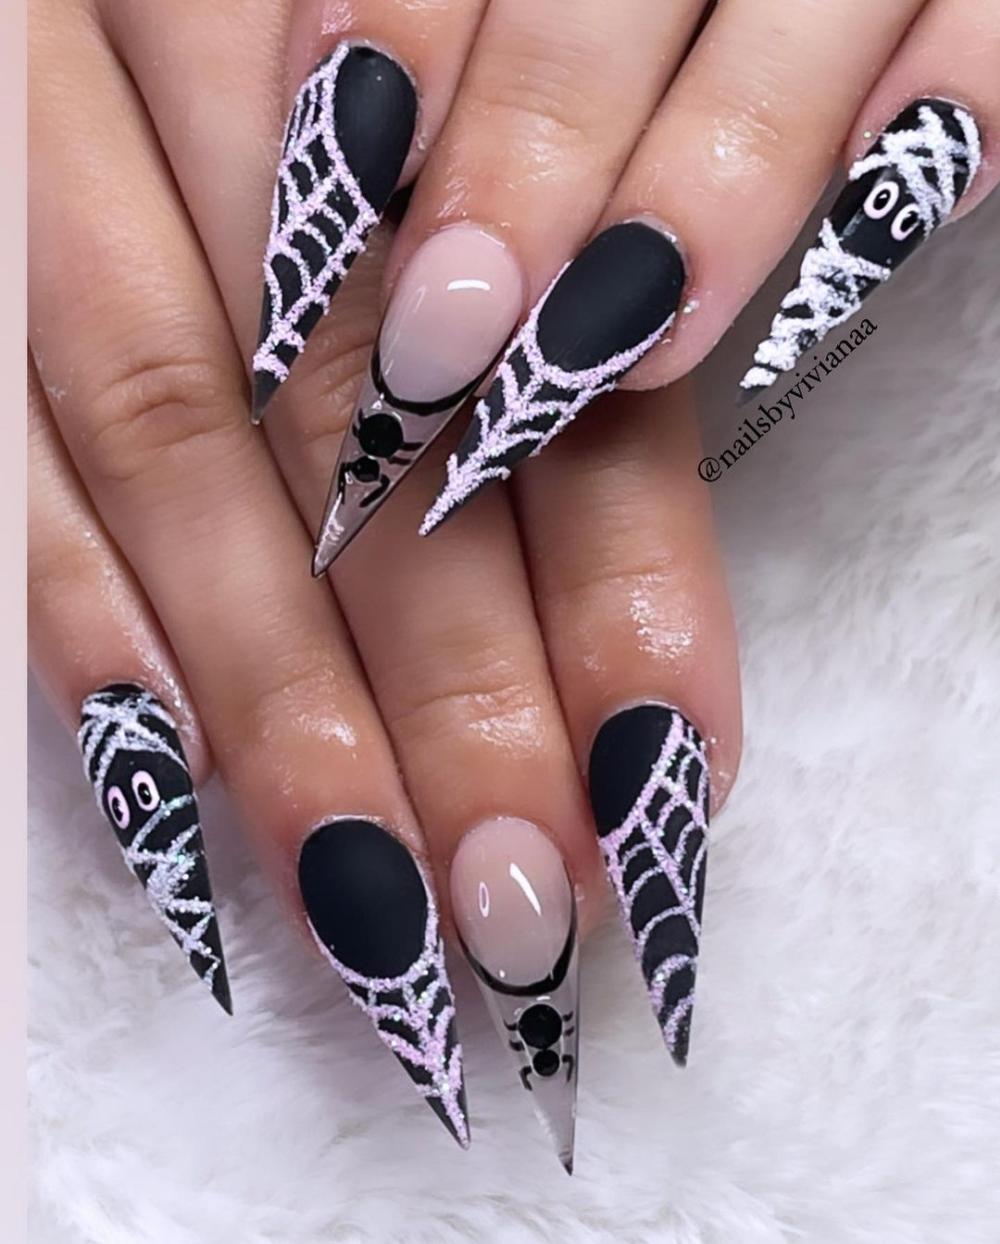 Spider nail art for halloween 